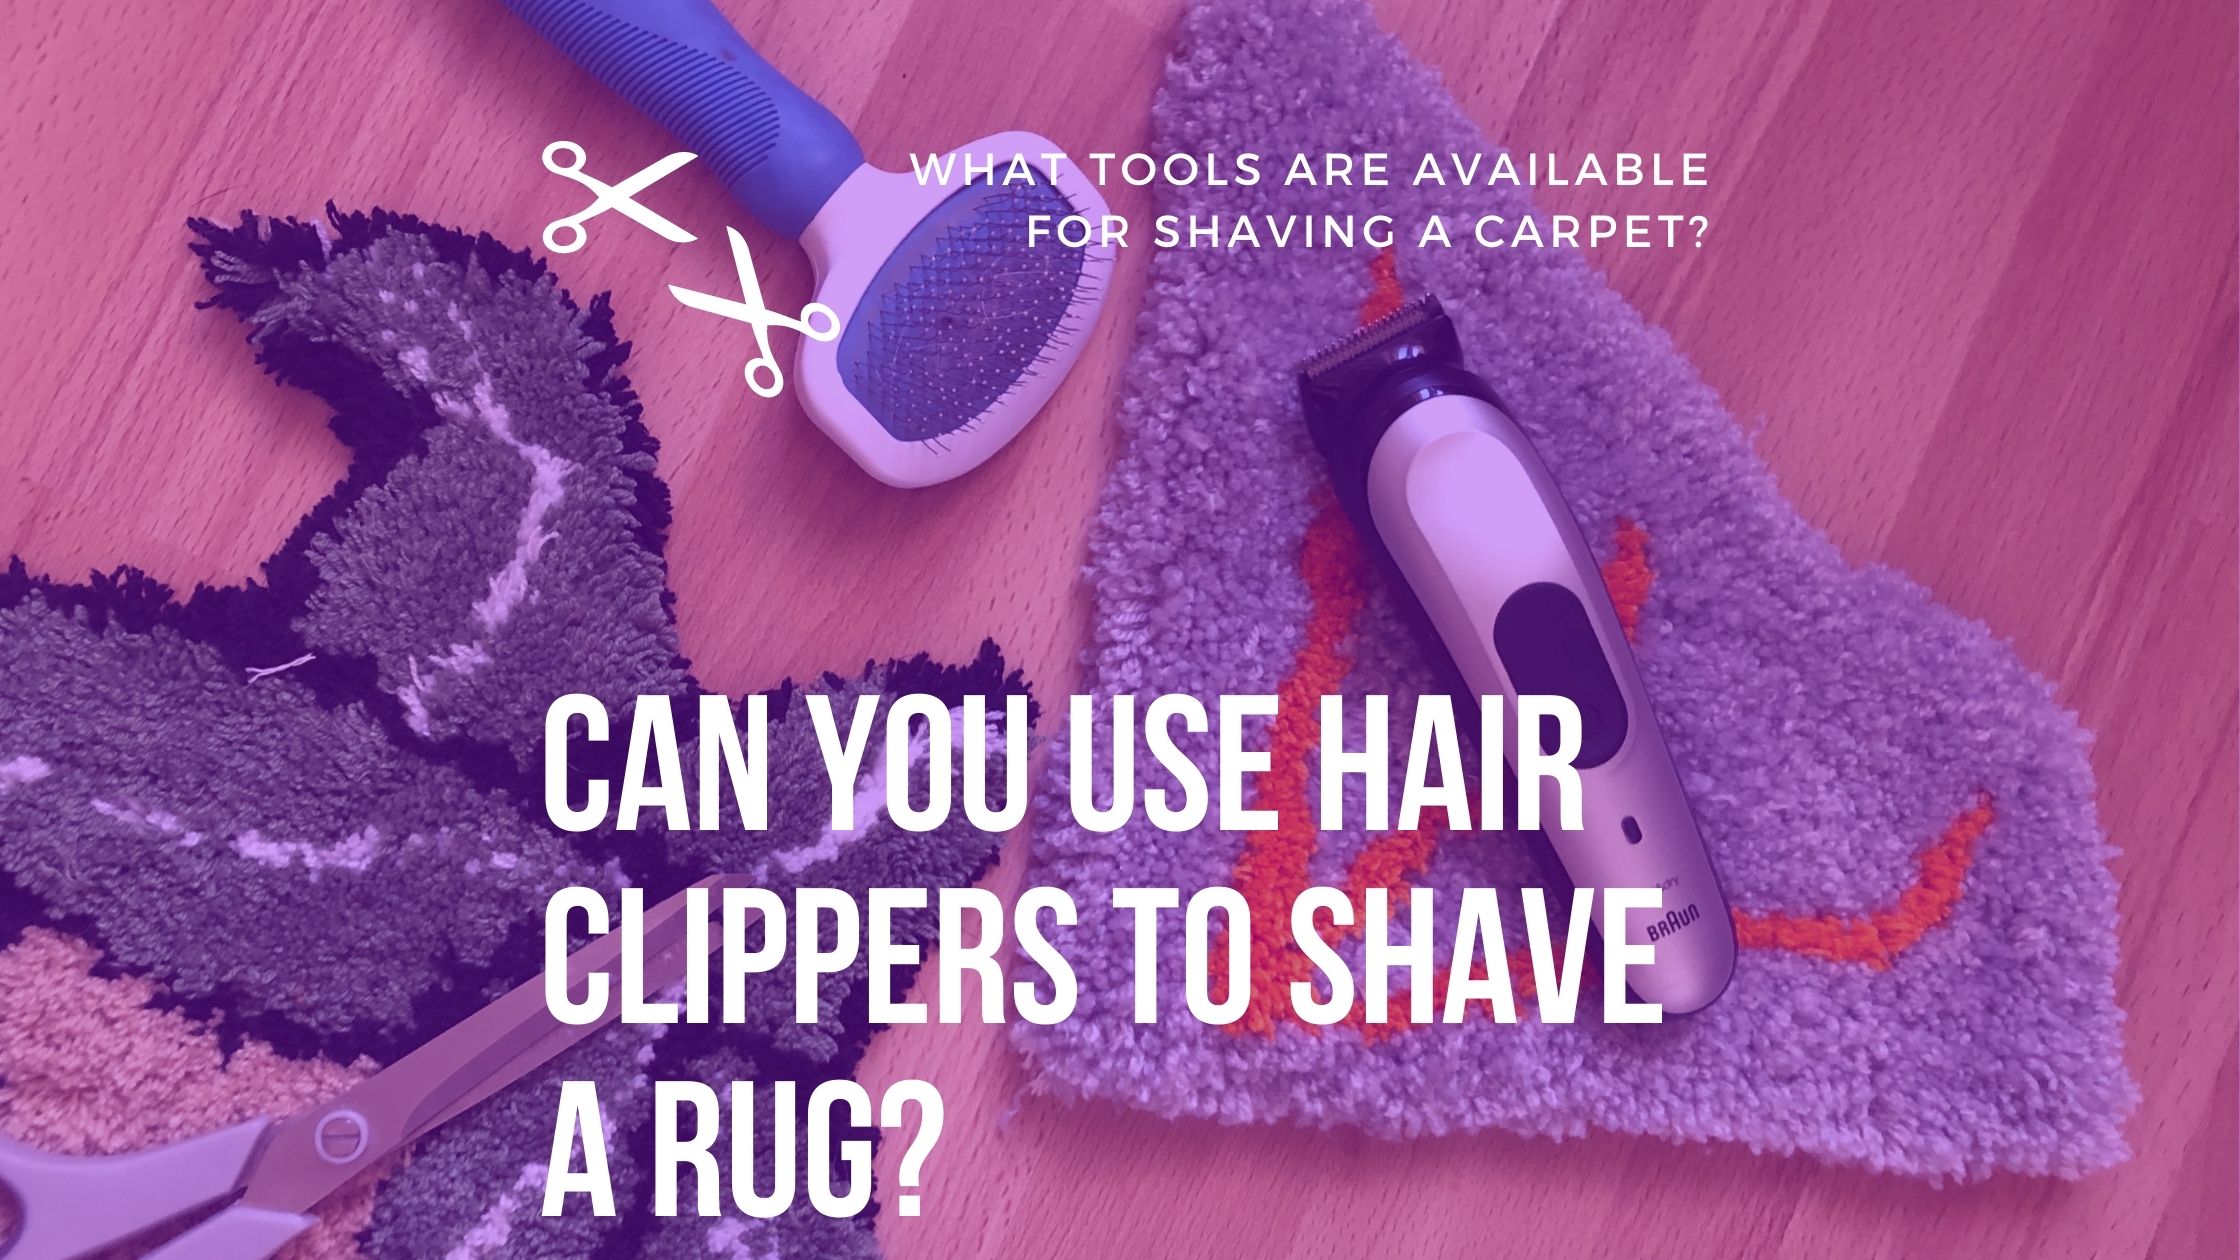 Can You Use Hair Clippers To Shave A Rug?